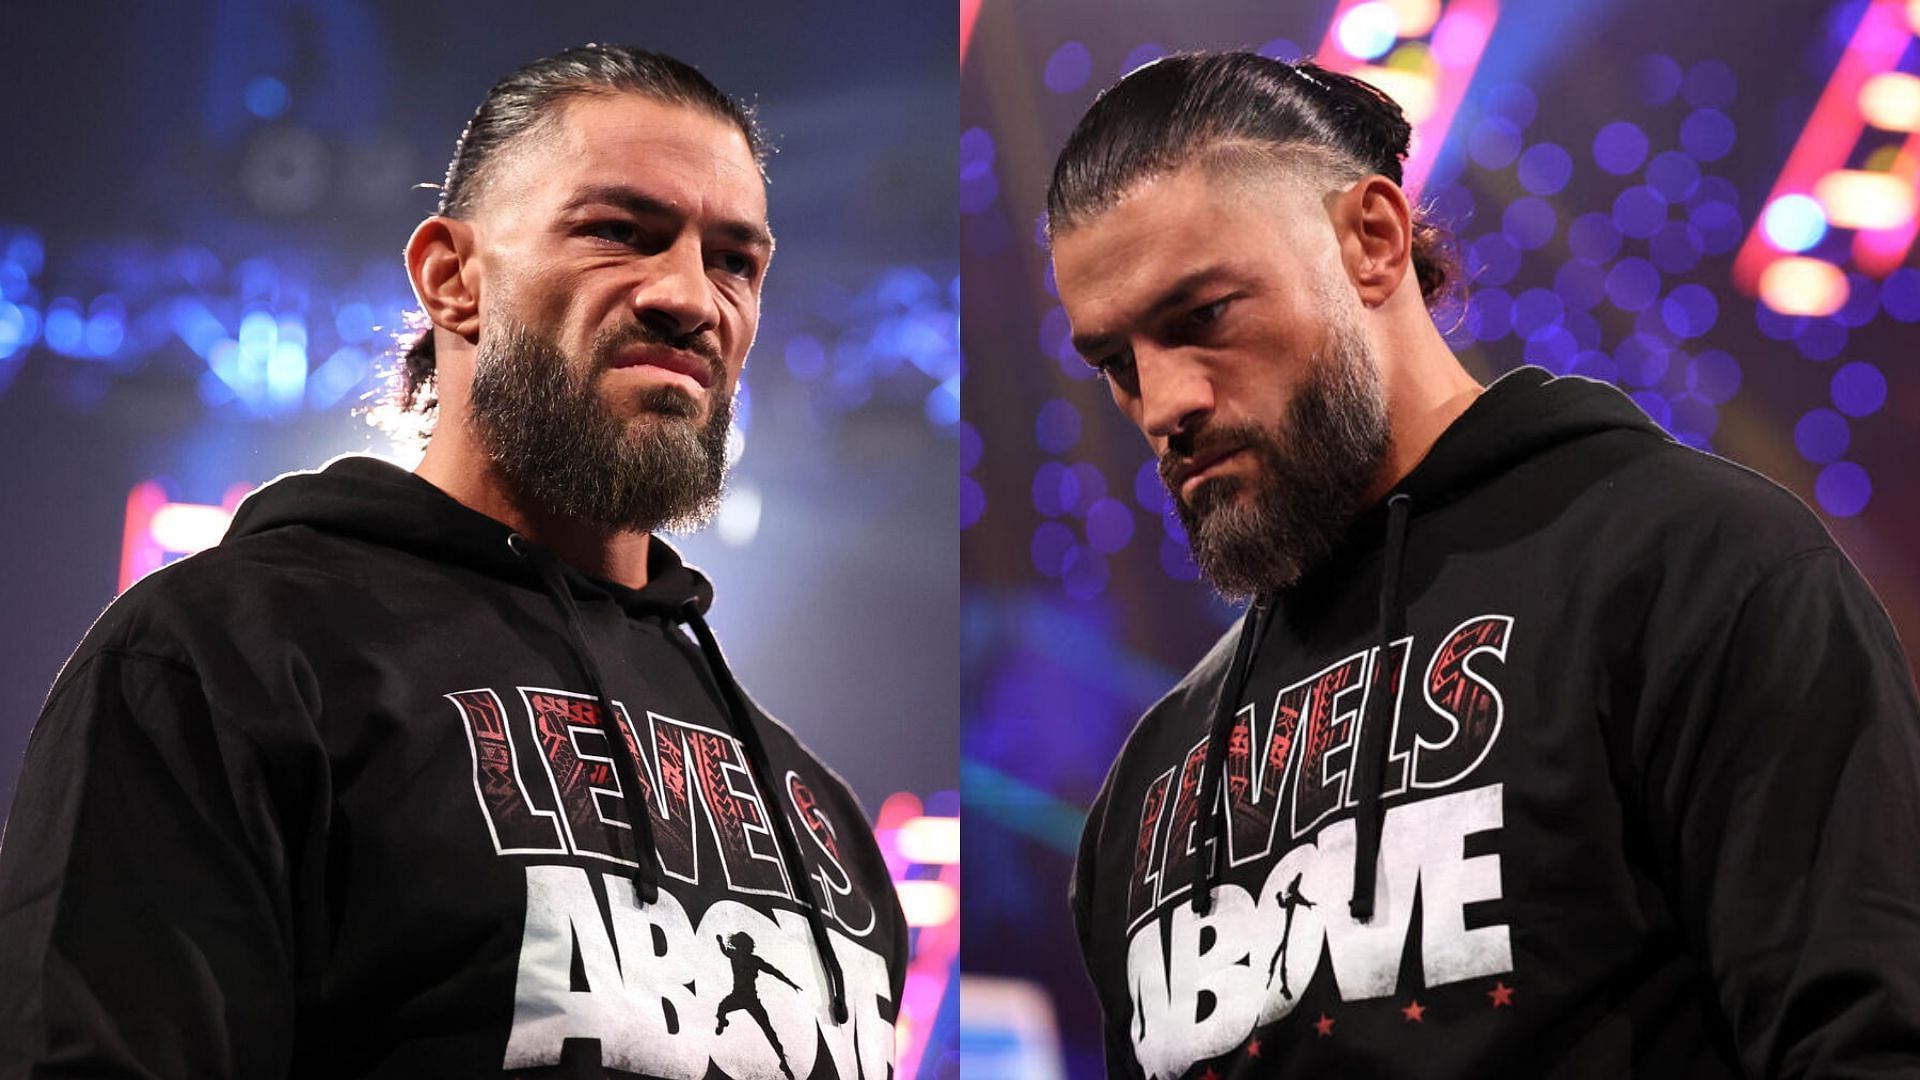 Reigns has not appeared since WrestleMania.